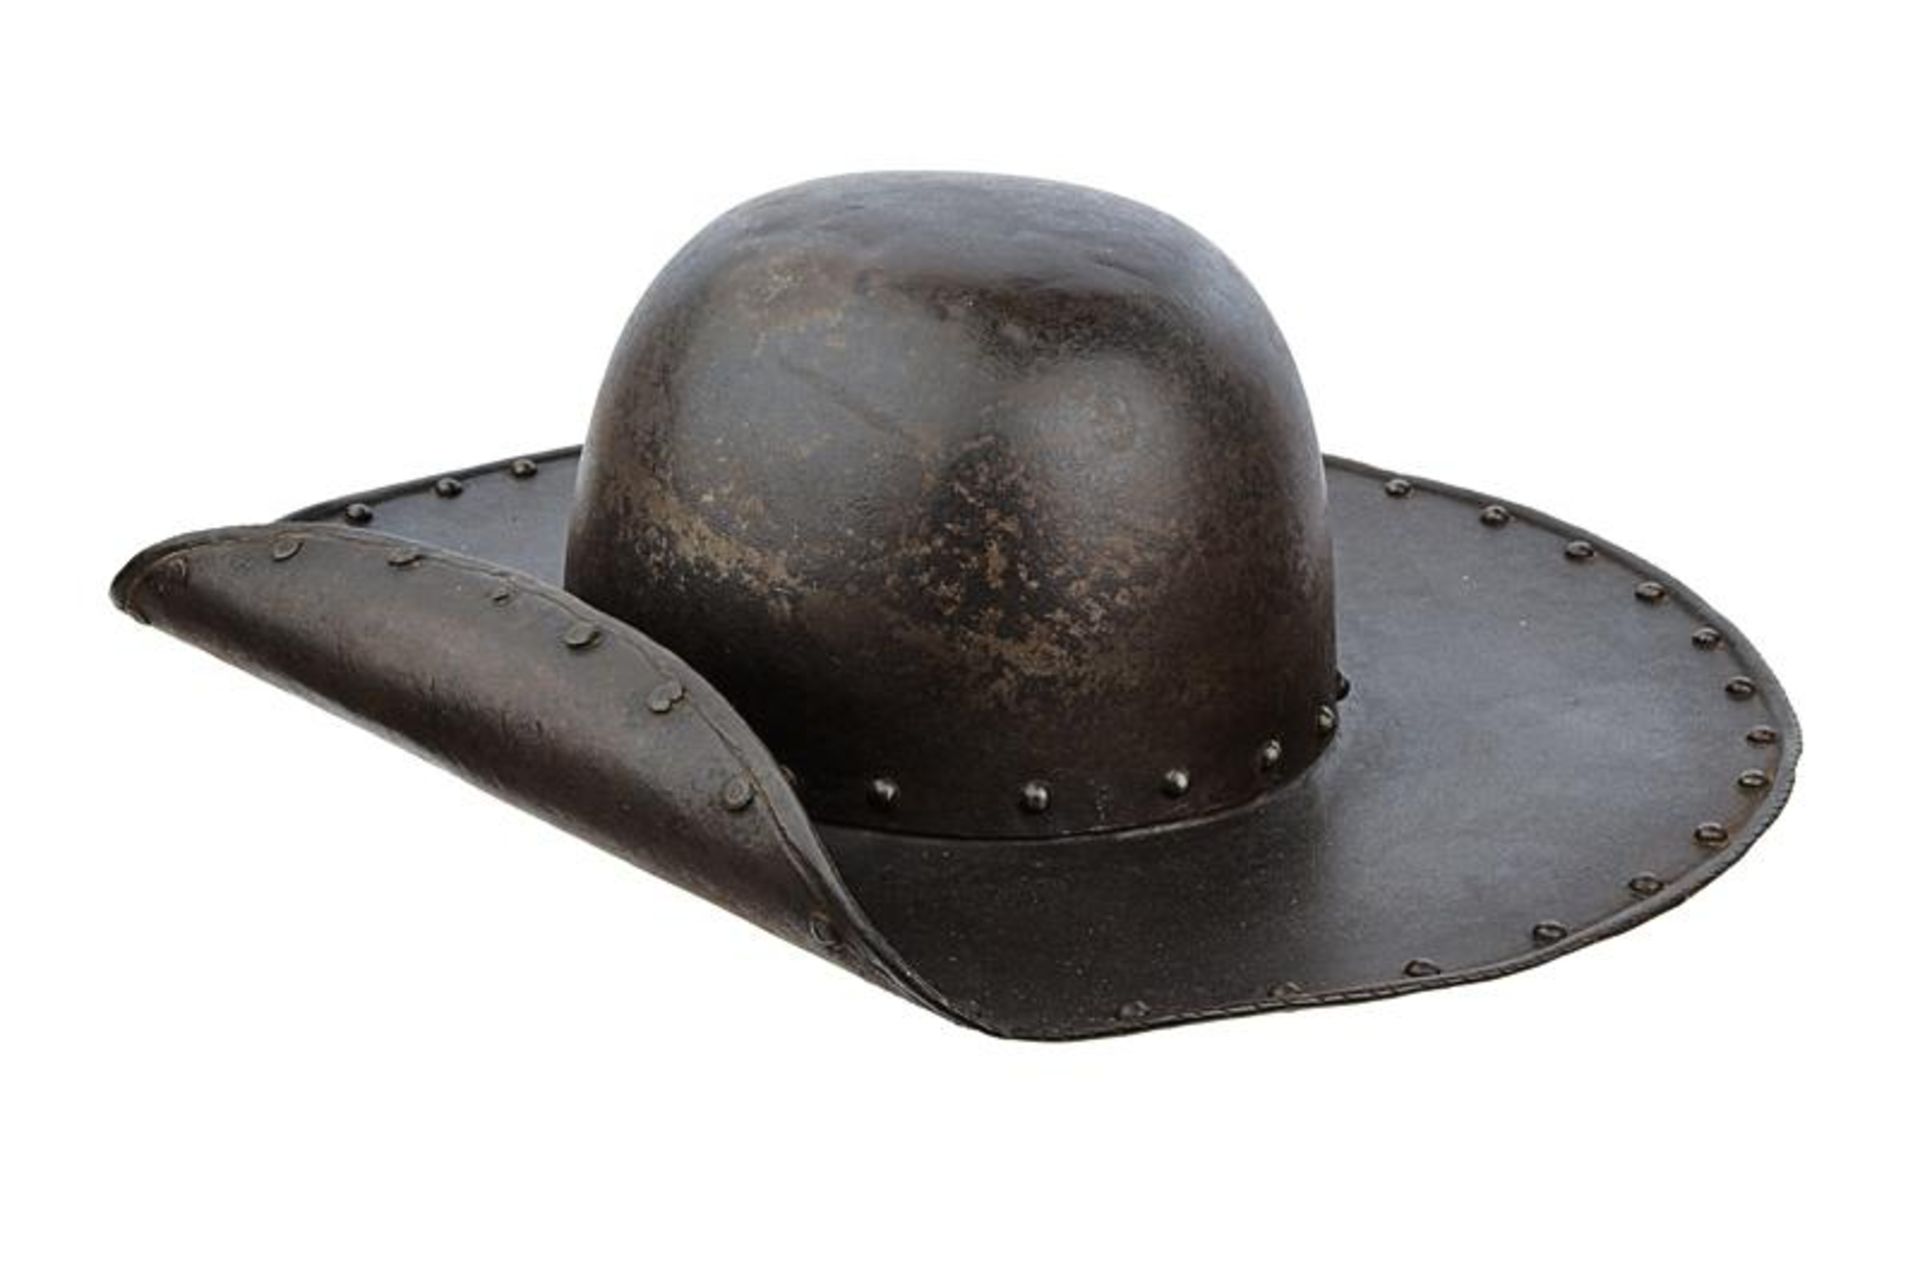 A rare helmet in the shape of a cavalier's hat